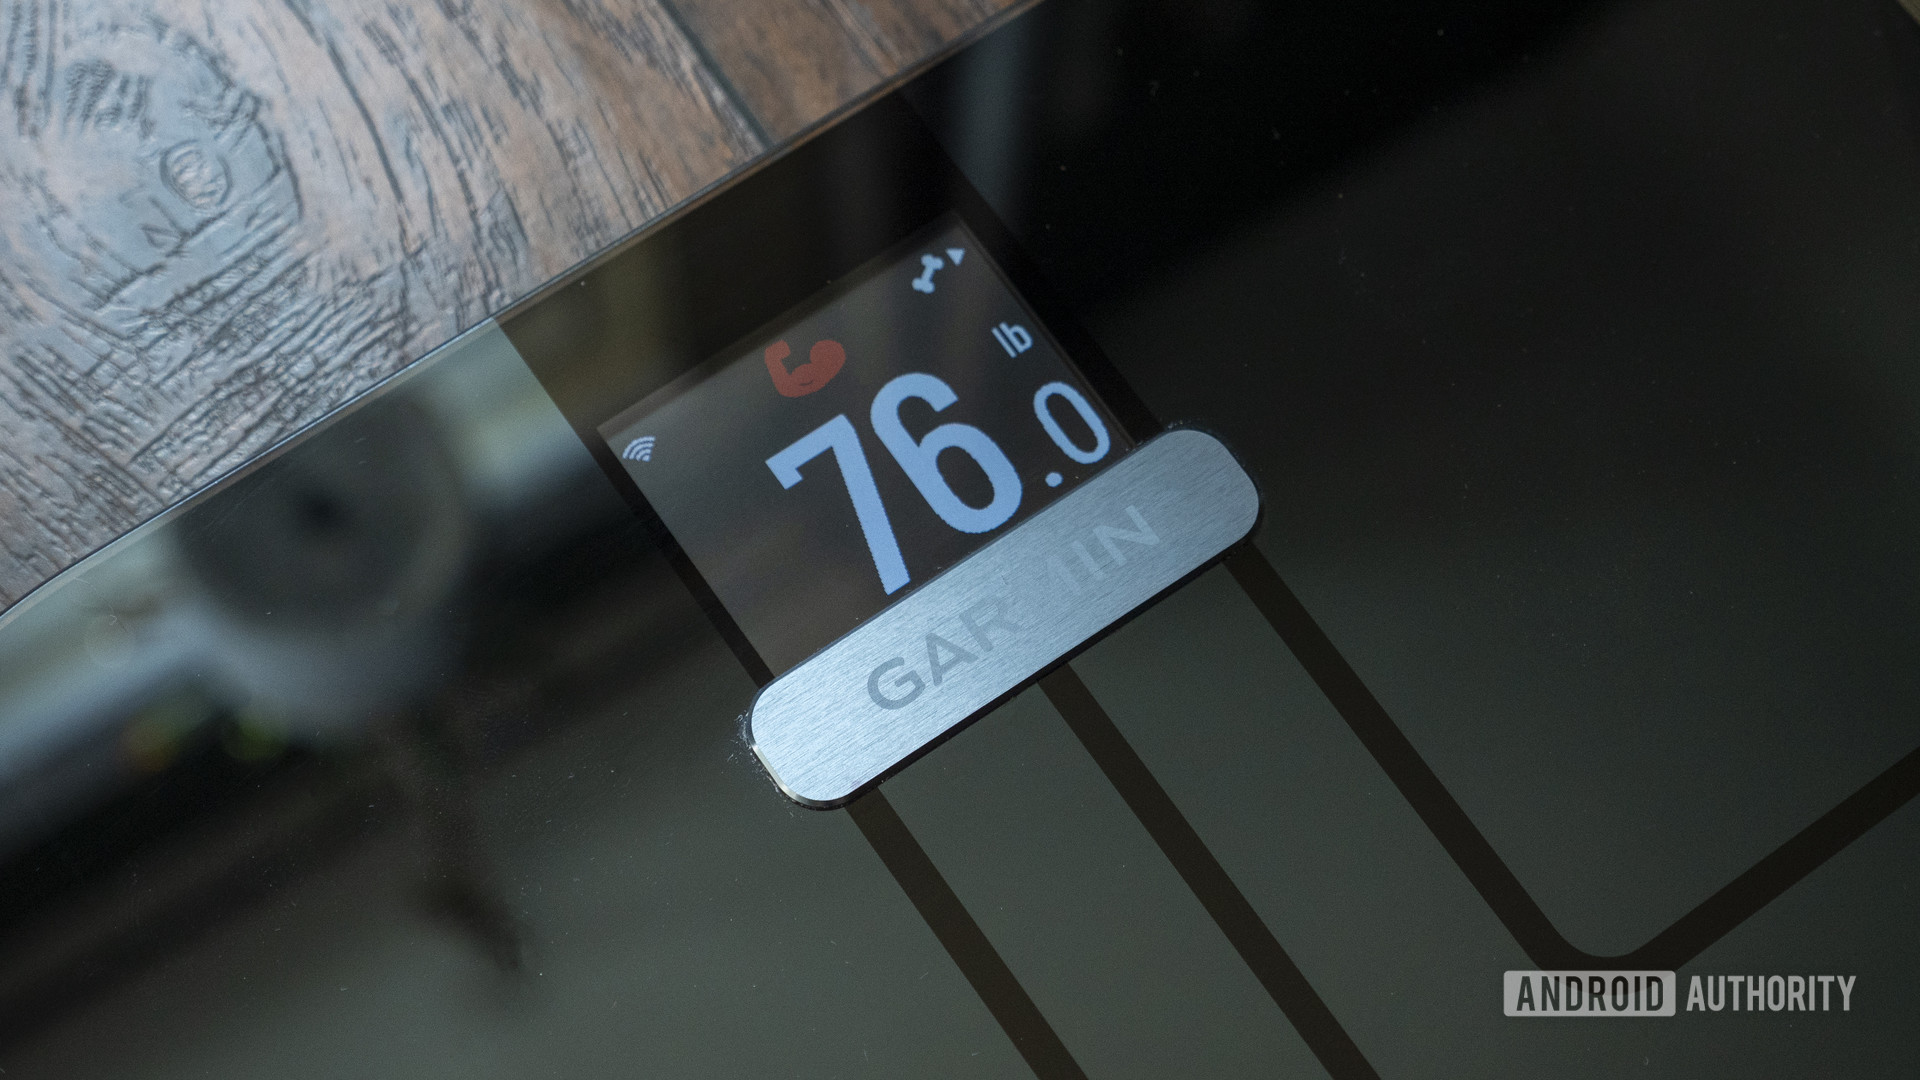 garmin index s2 smart scale review skeletal muscle mass